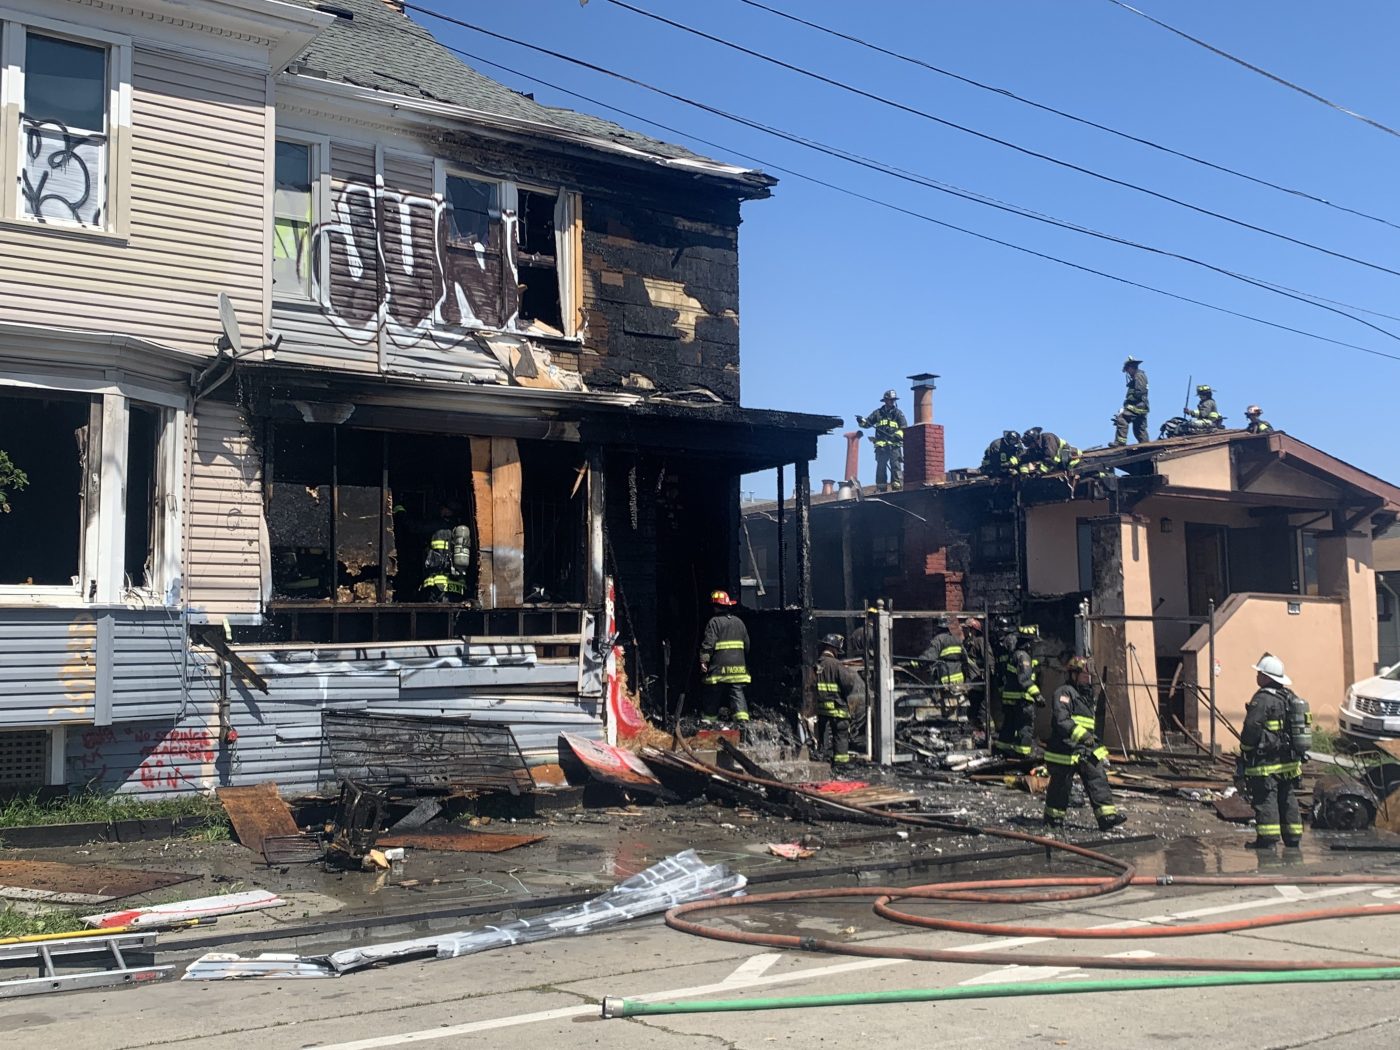 3-alarm-oakland-fire-nearly-destroys-one-vacant-residence,-badly-damages-a-second-occupied-home